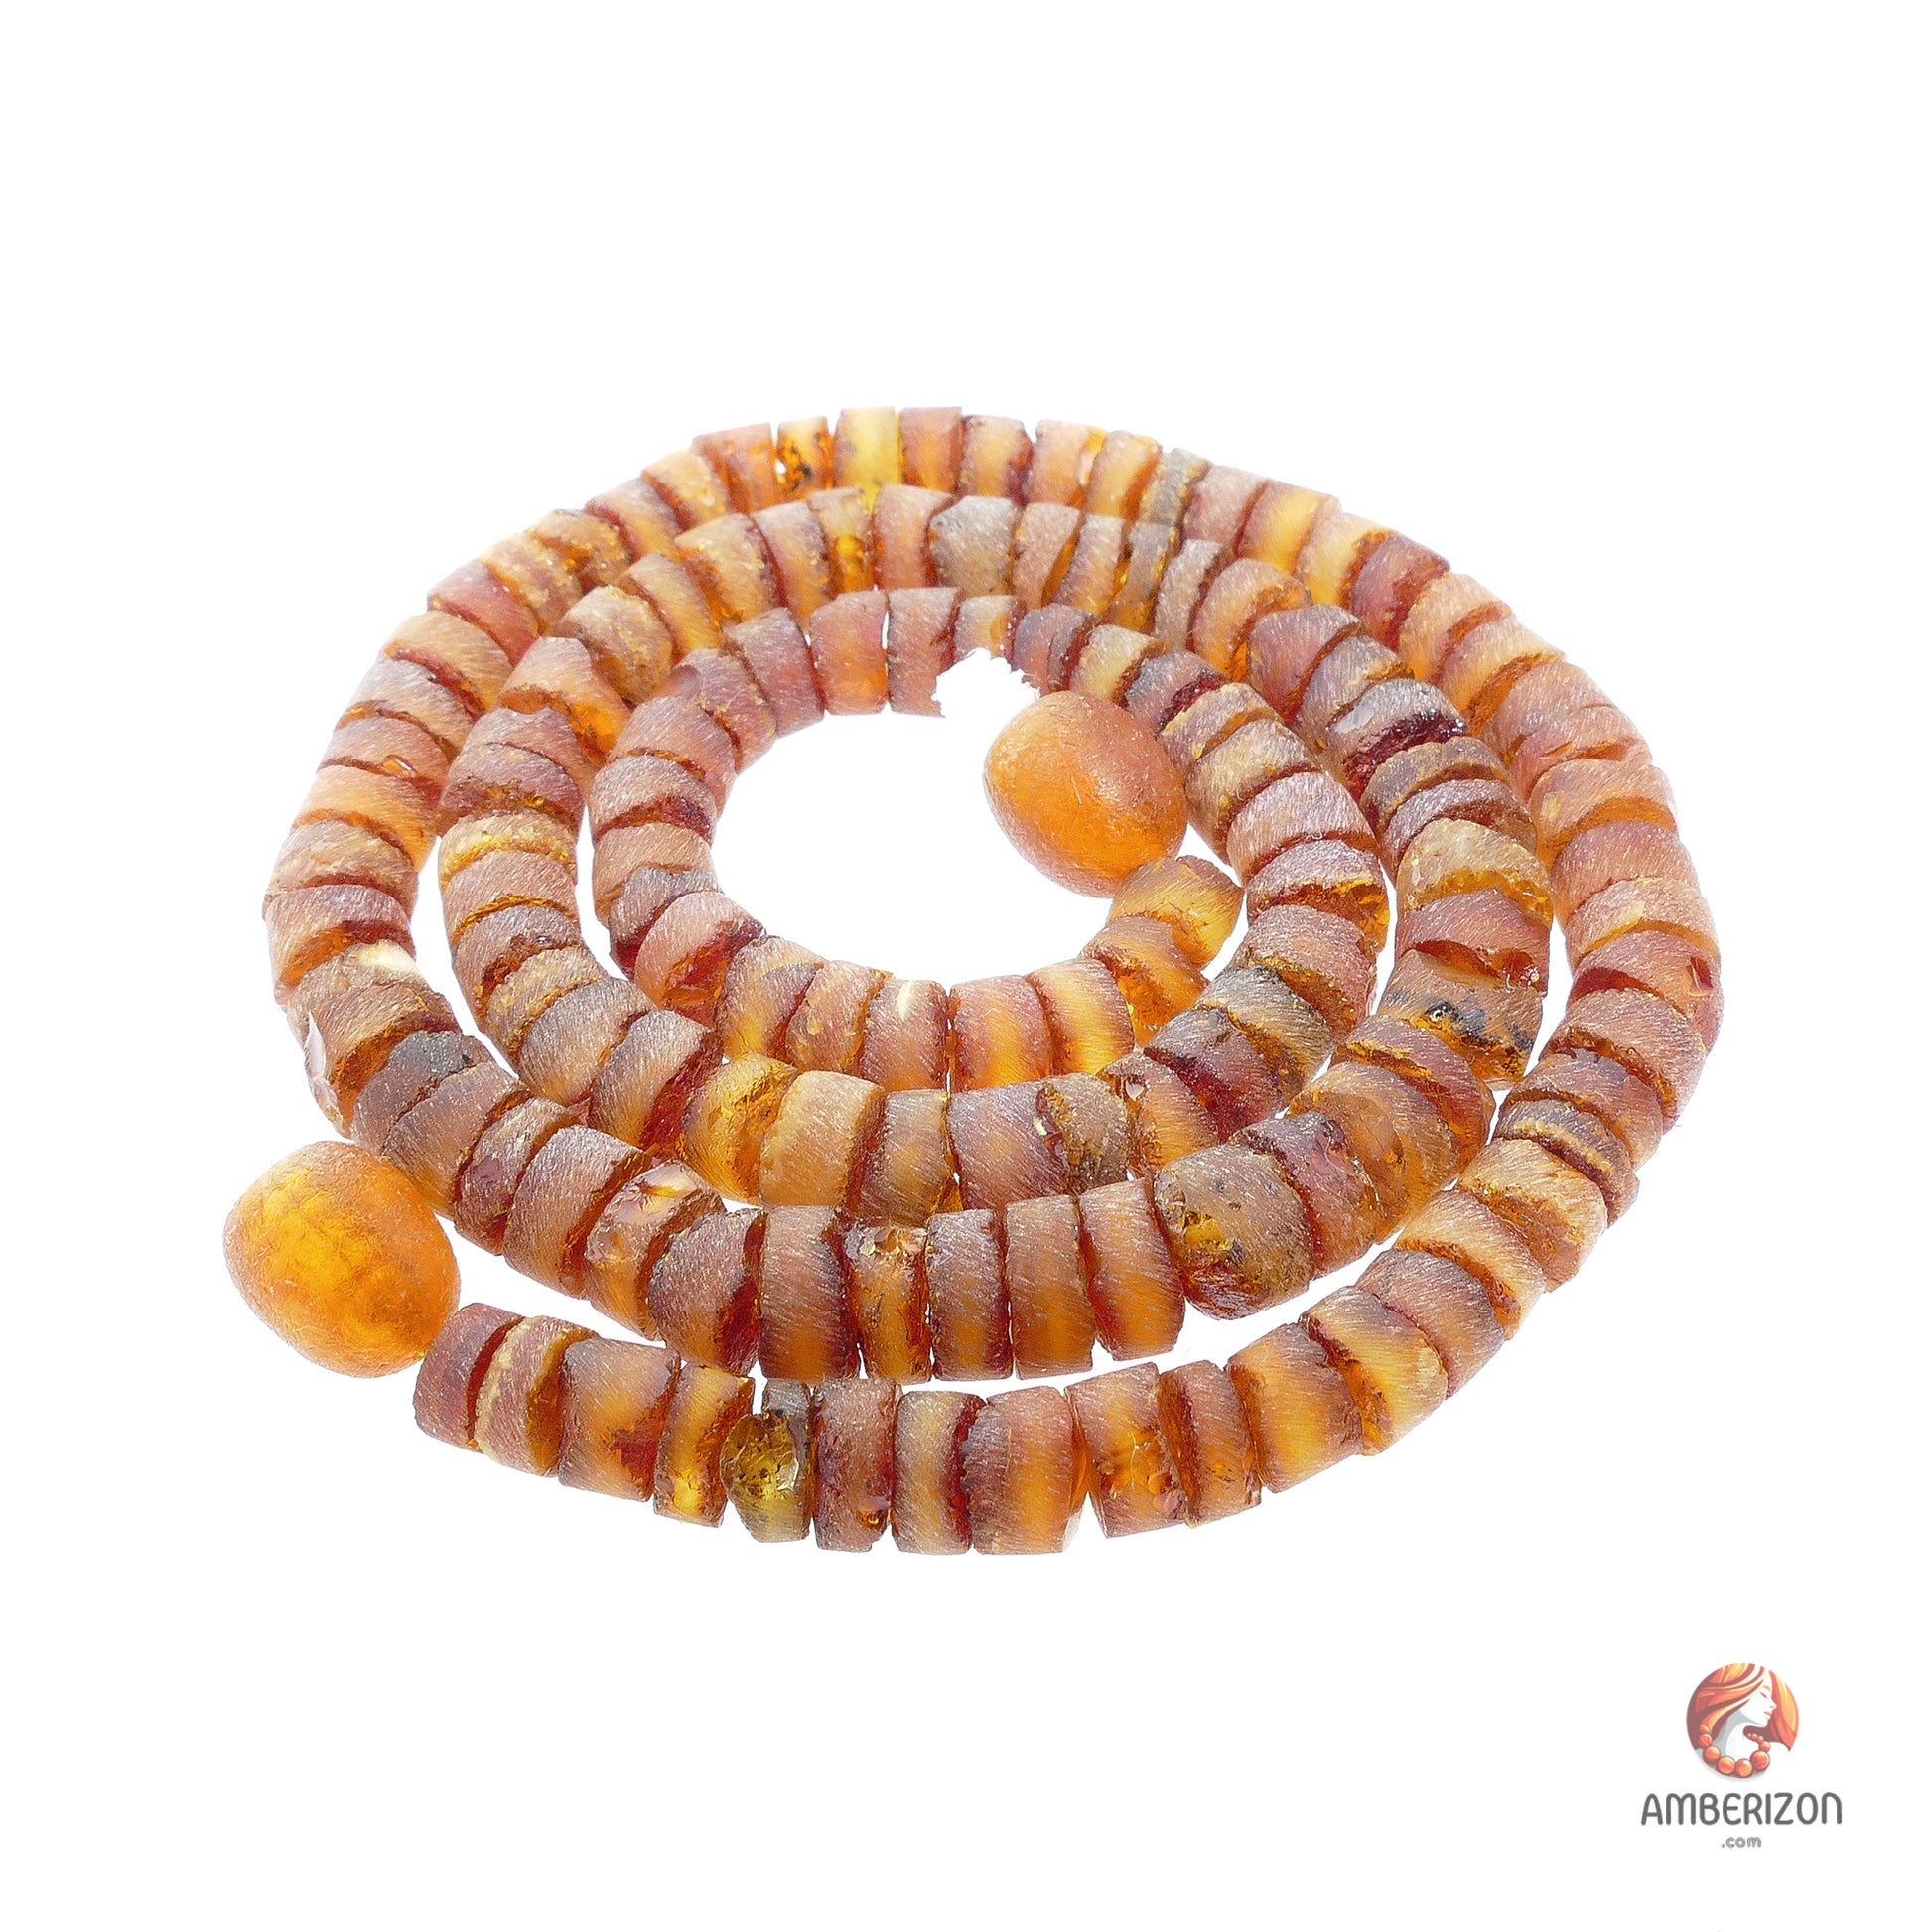 Women's necklace - Cylinder unpolished amber beads in orange-red color